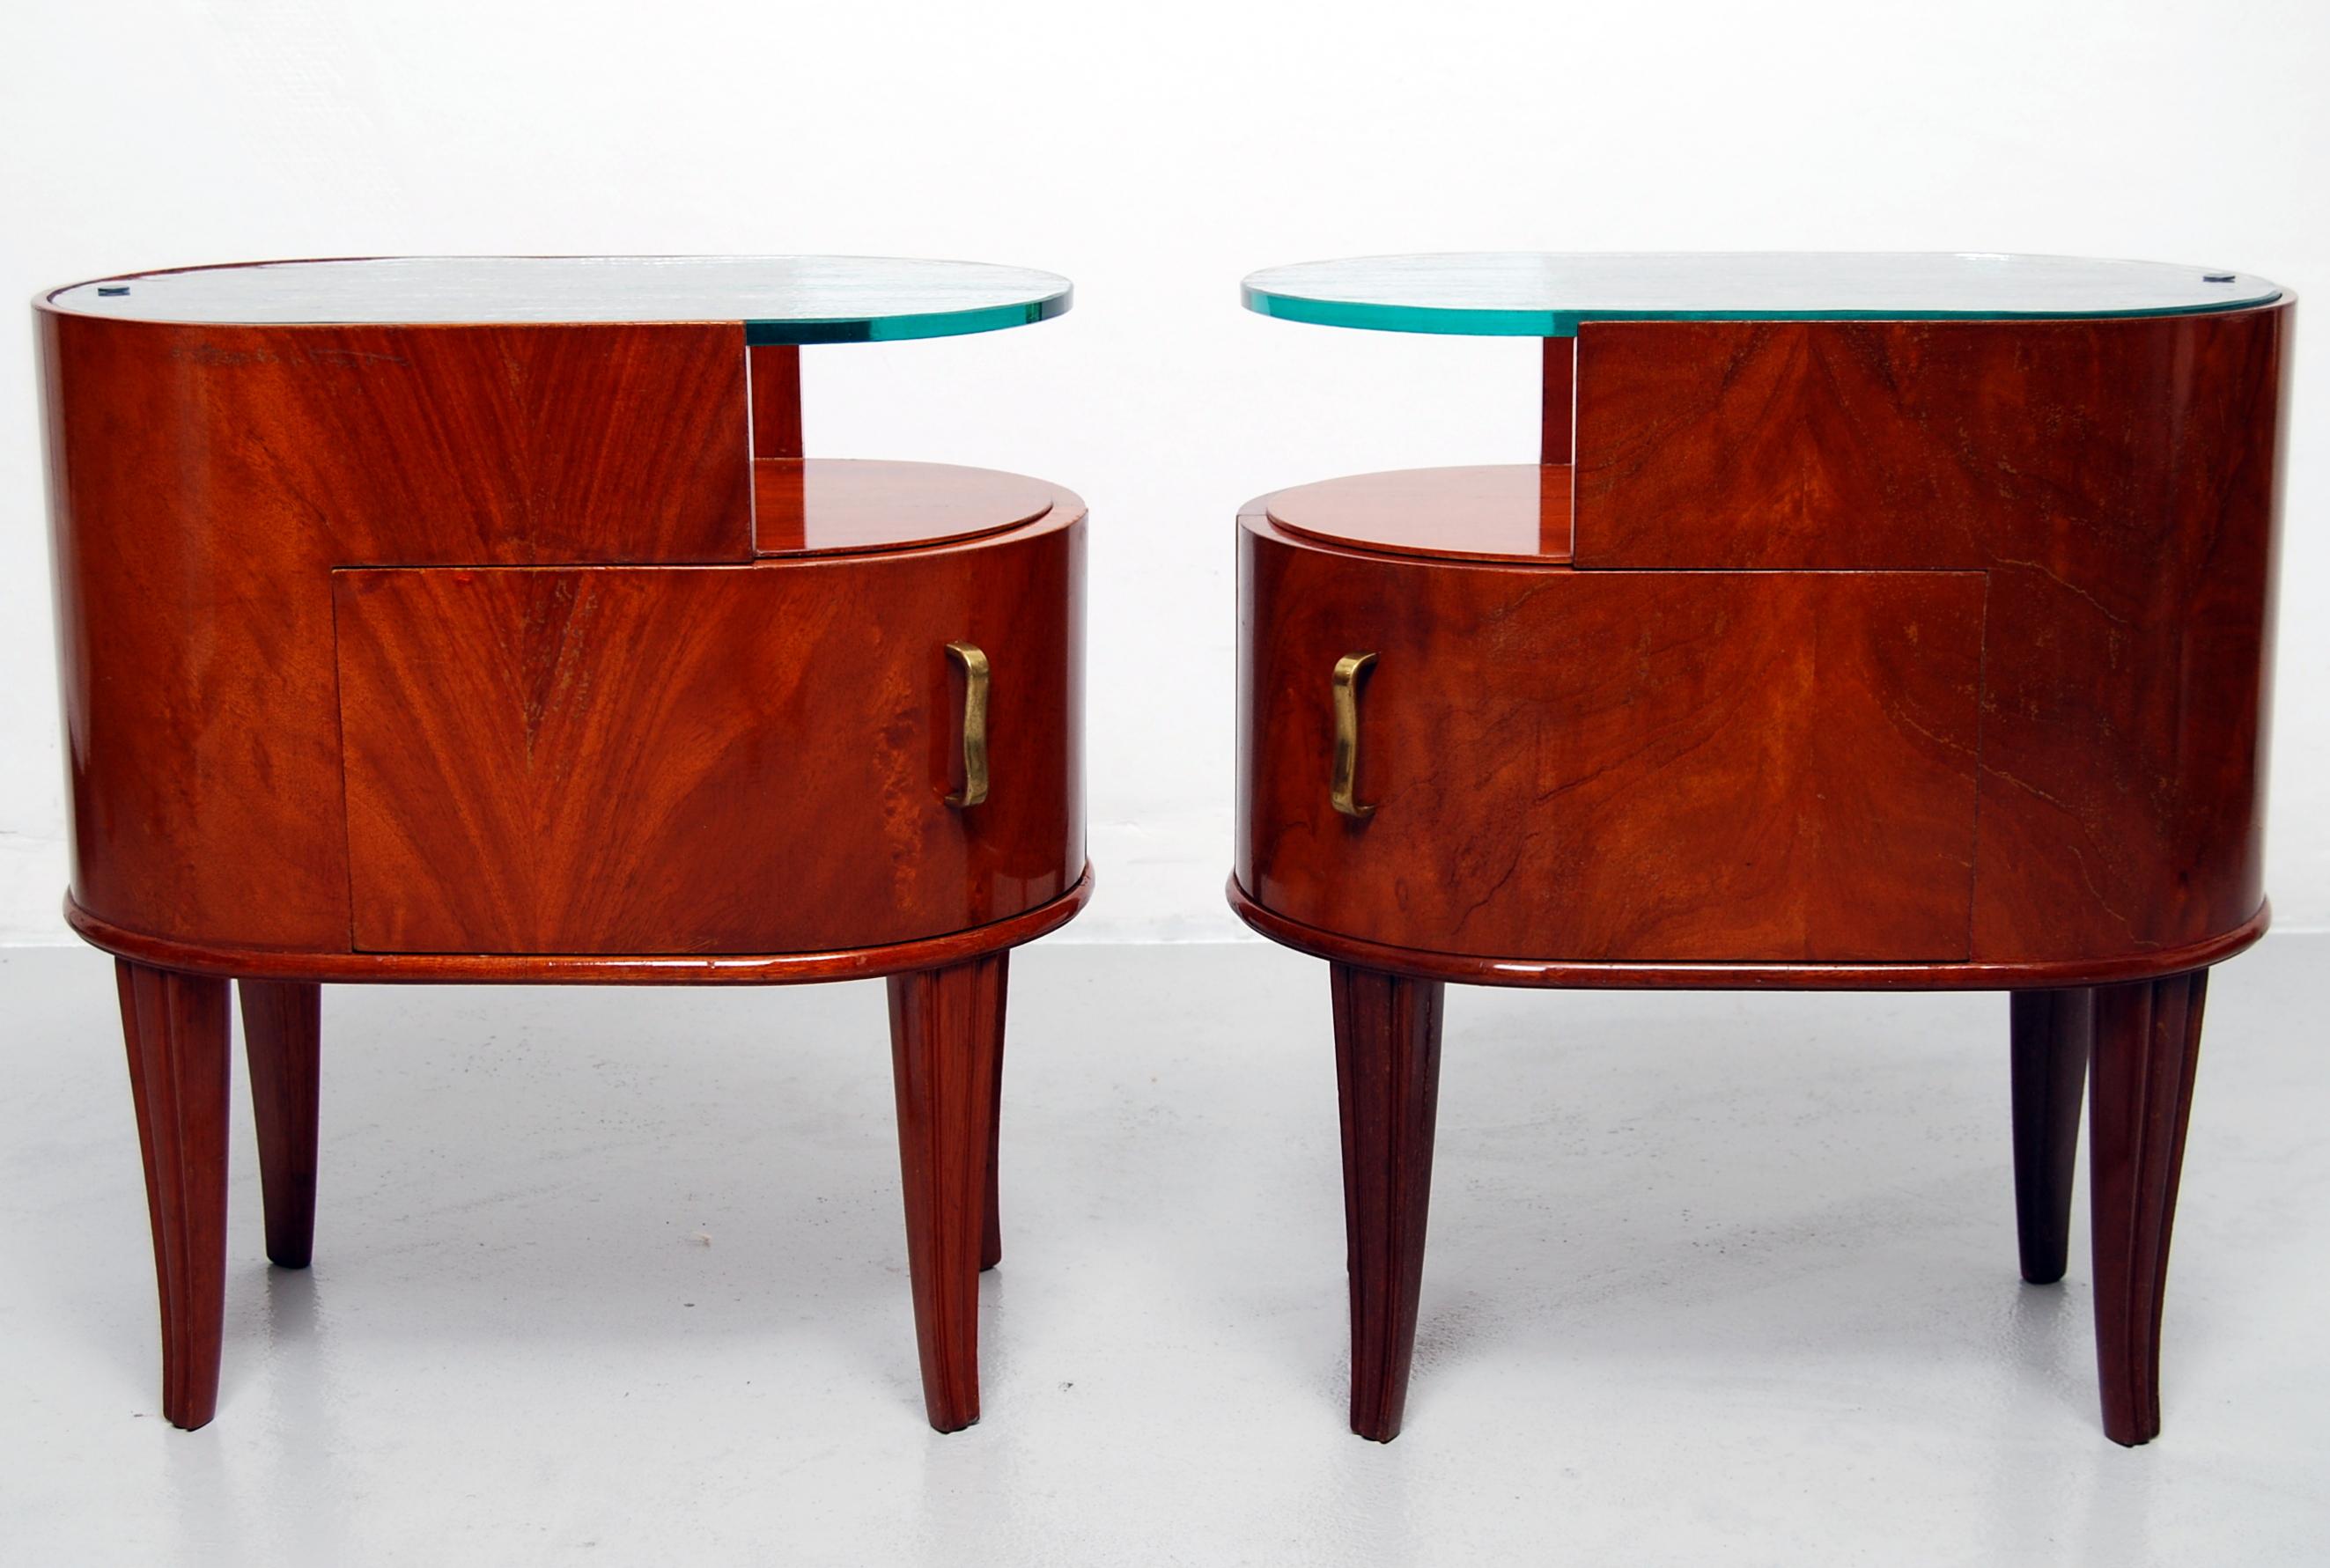 Scandinavian Modern Rare Pair of Bedside Tables or Nightstands by Axel Larsson Produced by SMF